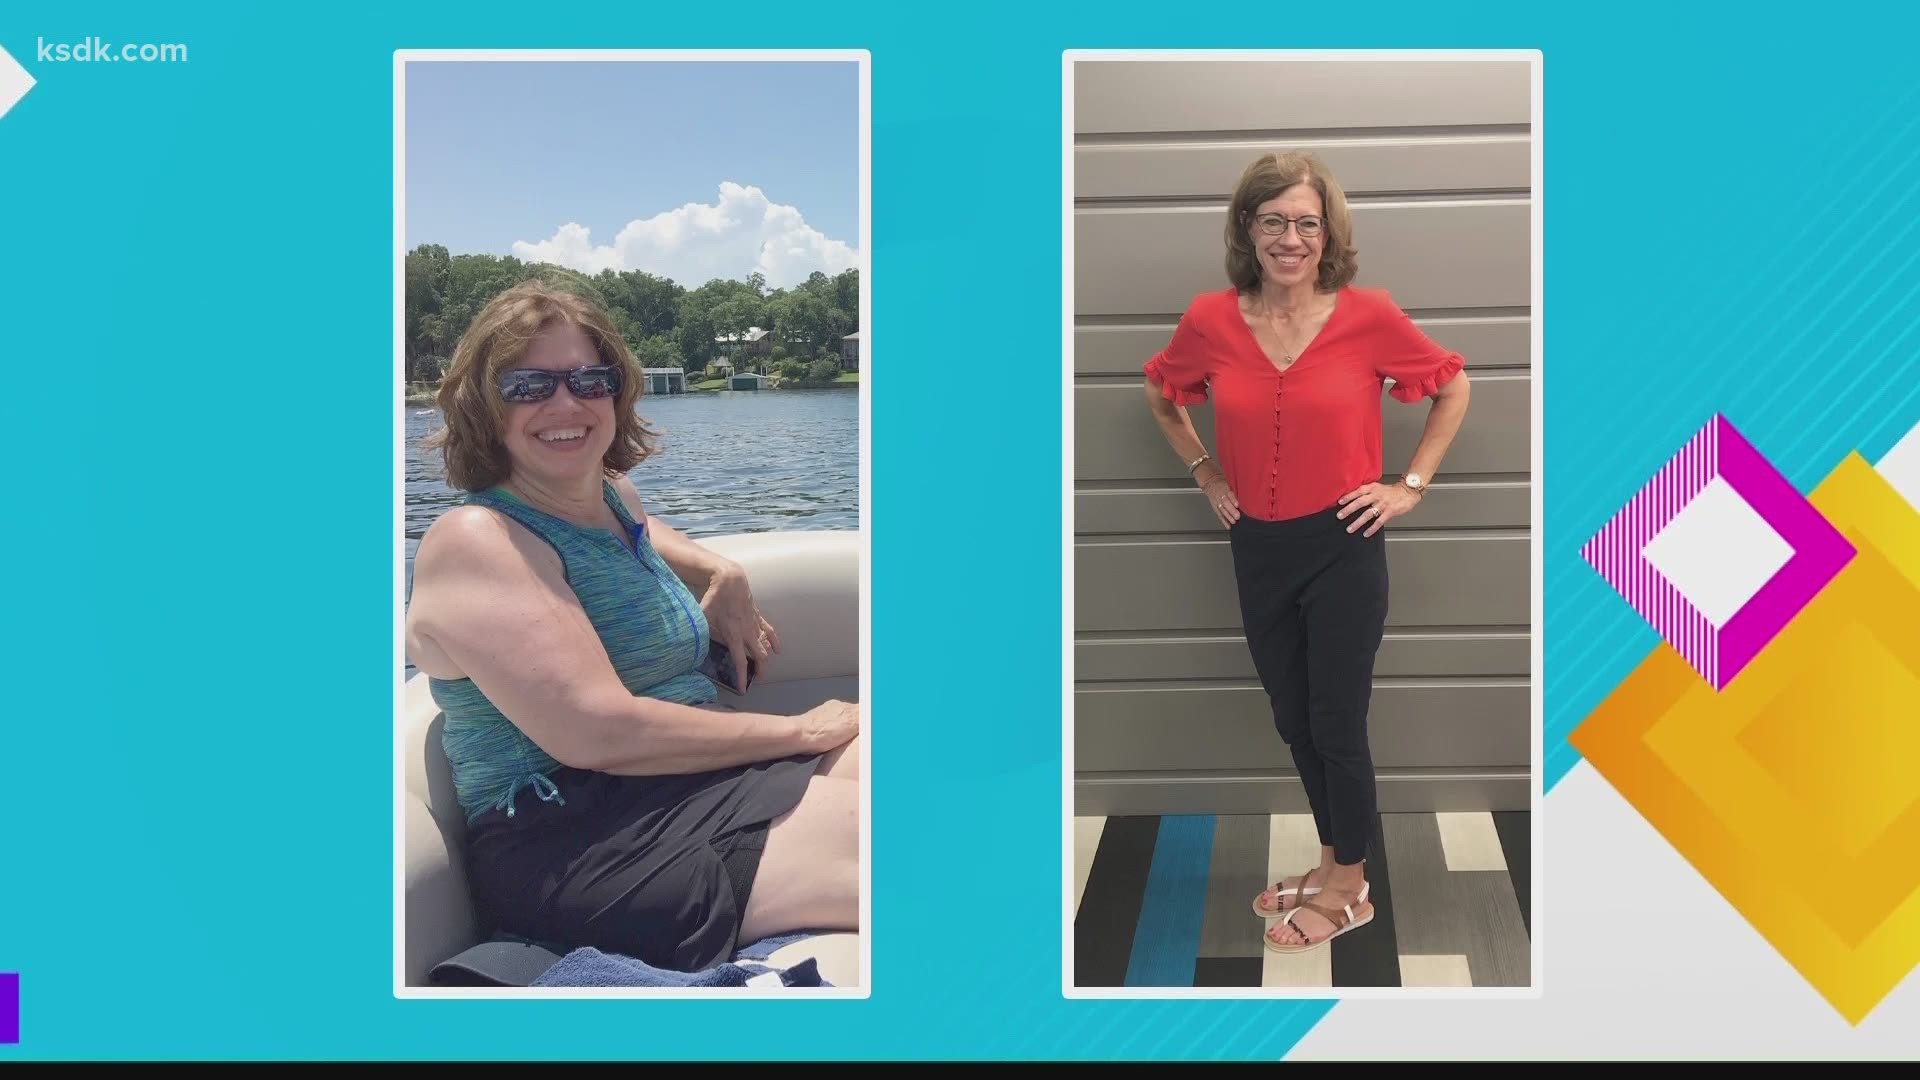 Like so many others, Lori thought she had tried everything to lose weight until she met Charles.